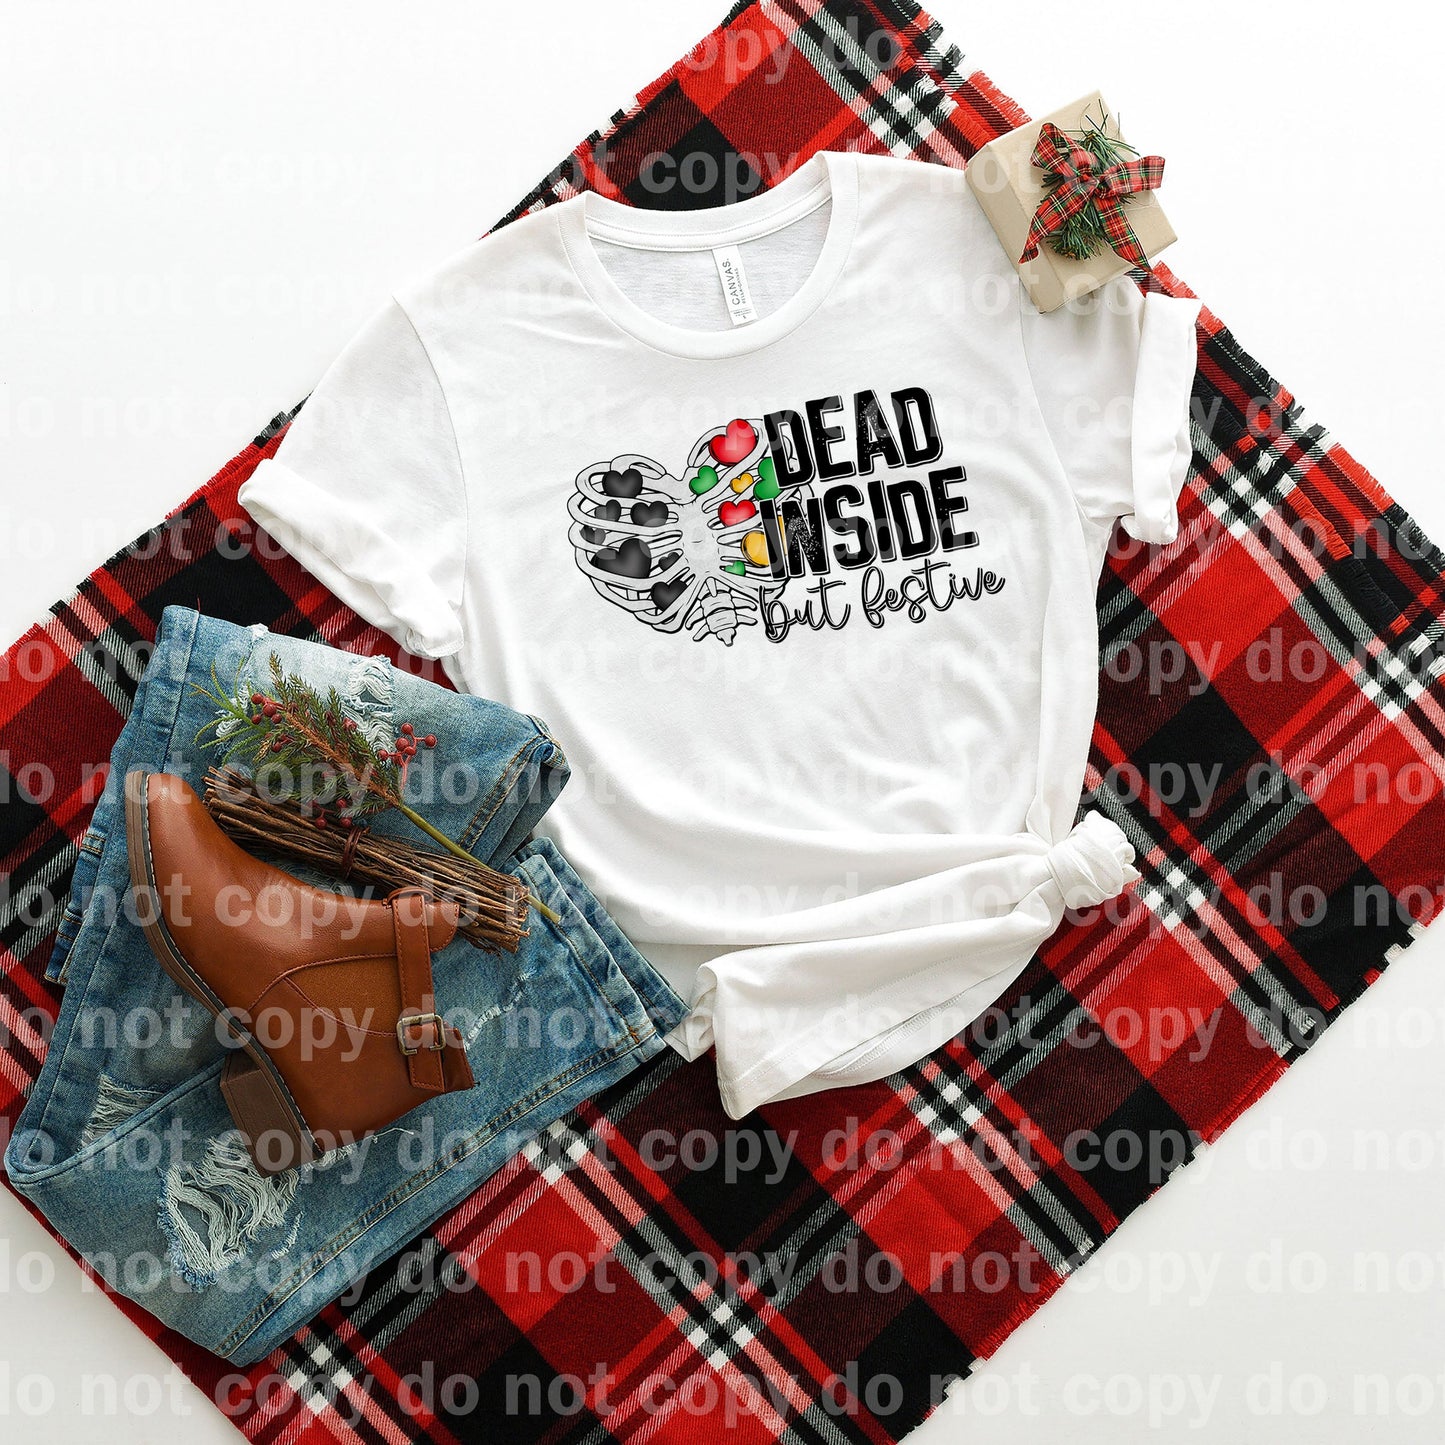 Dead Inside But Festive With Black Hearts Dream Print or Sublimation Print